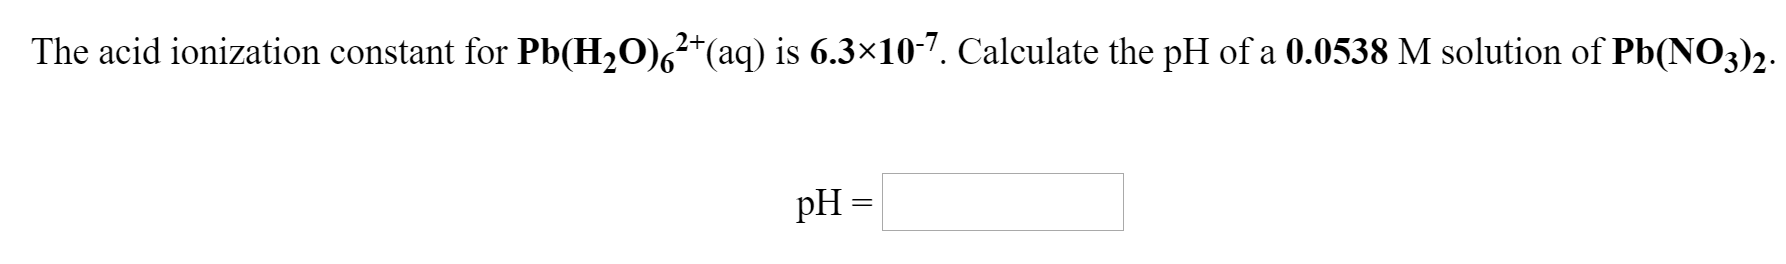 2+
The acid ionization constant for Pb(H,O),²*(aq) is 6.3×10-7. Calculate the pH of a 0.0538 M solution of Pb(NO3)2.
pH =
